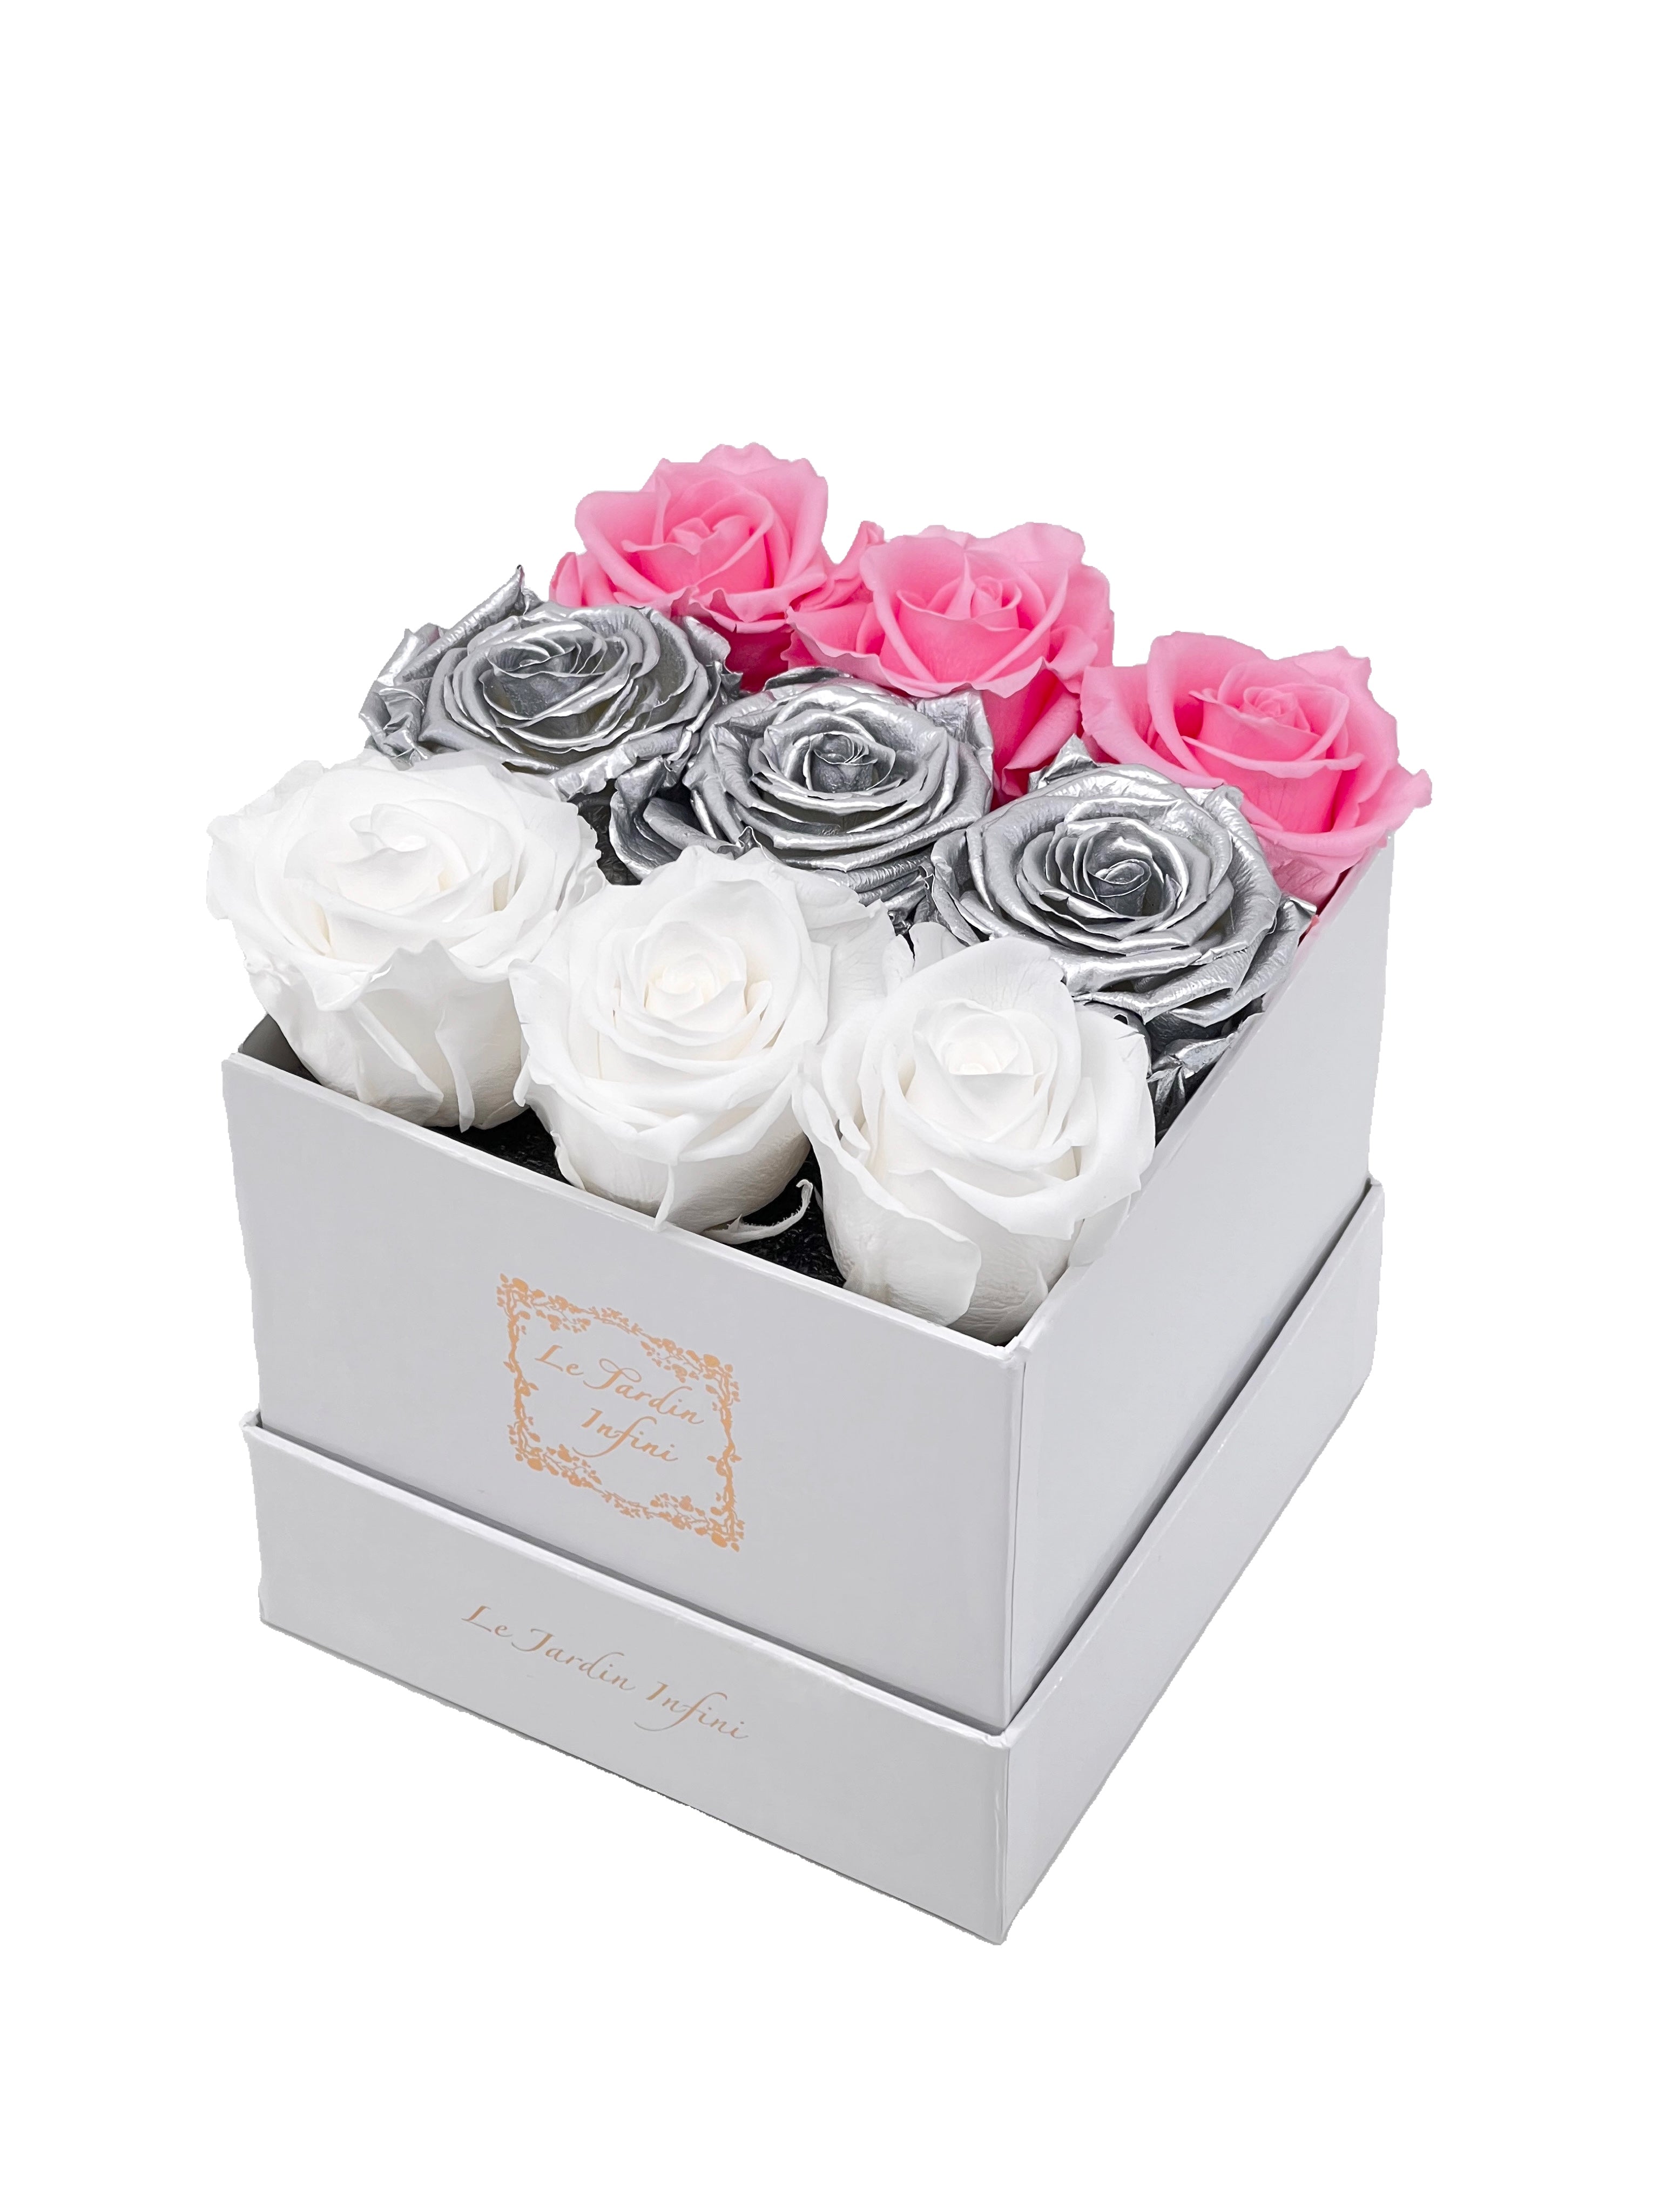 9 White, Silver & Pink Rows Preserved Roses - Luxury Square Shiny White Box